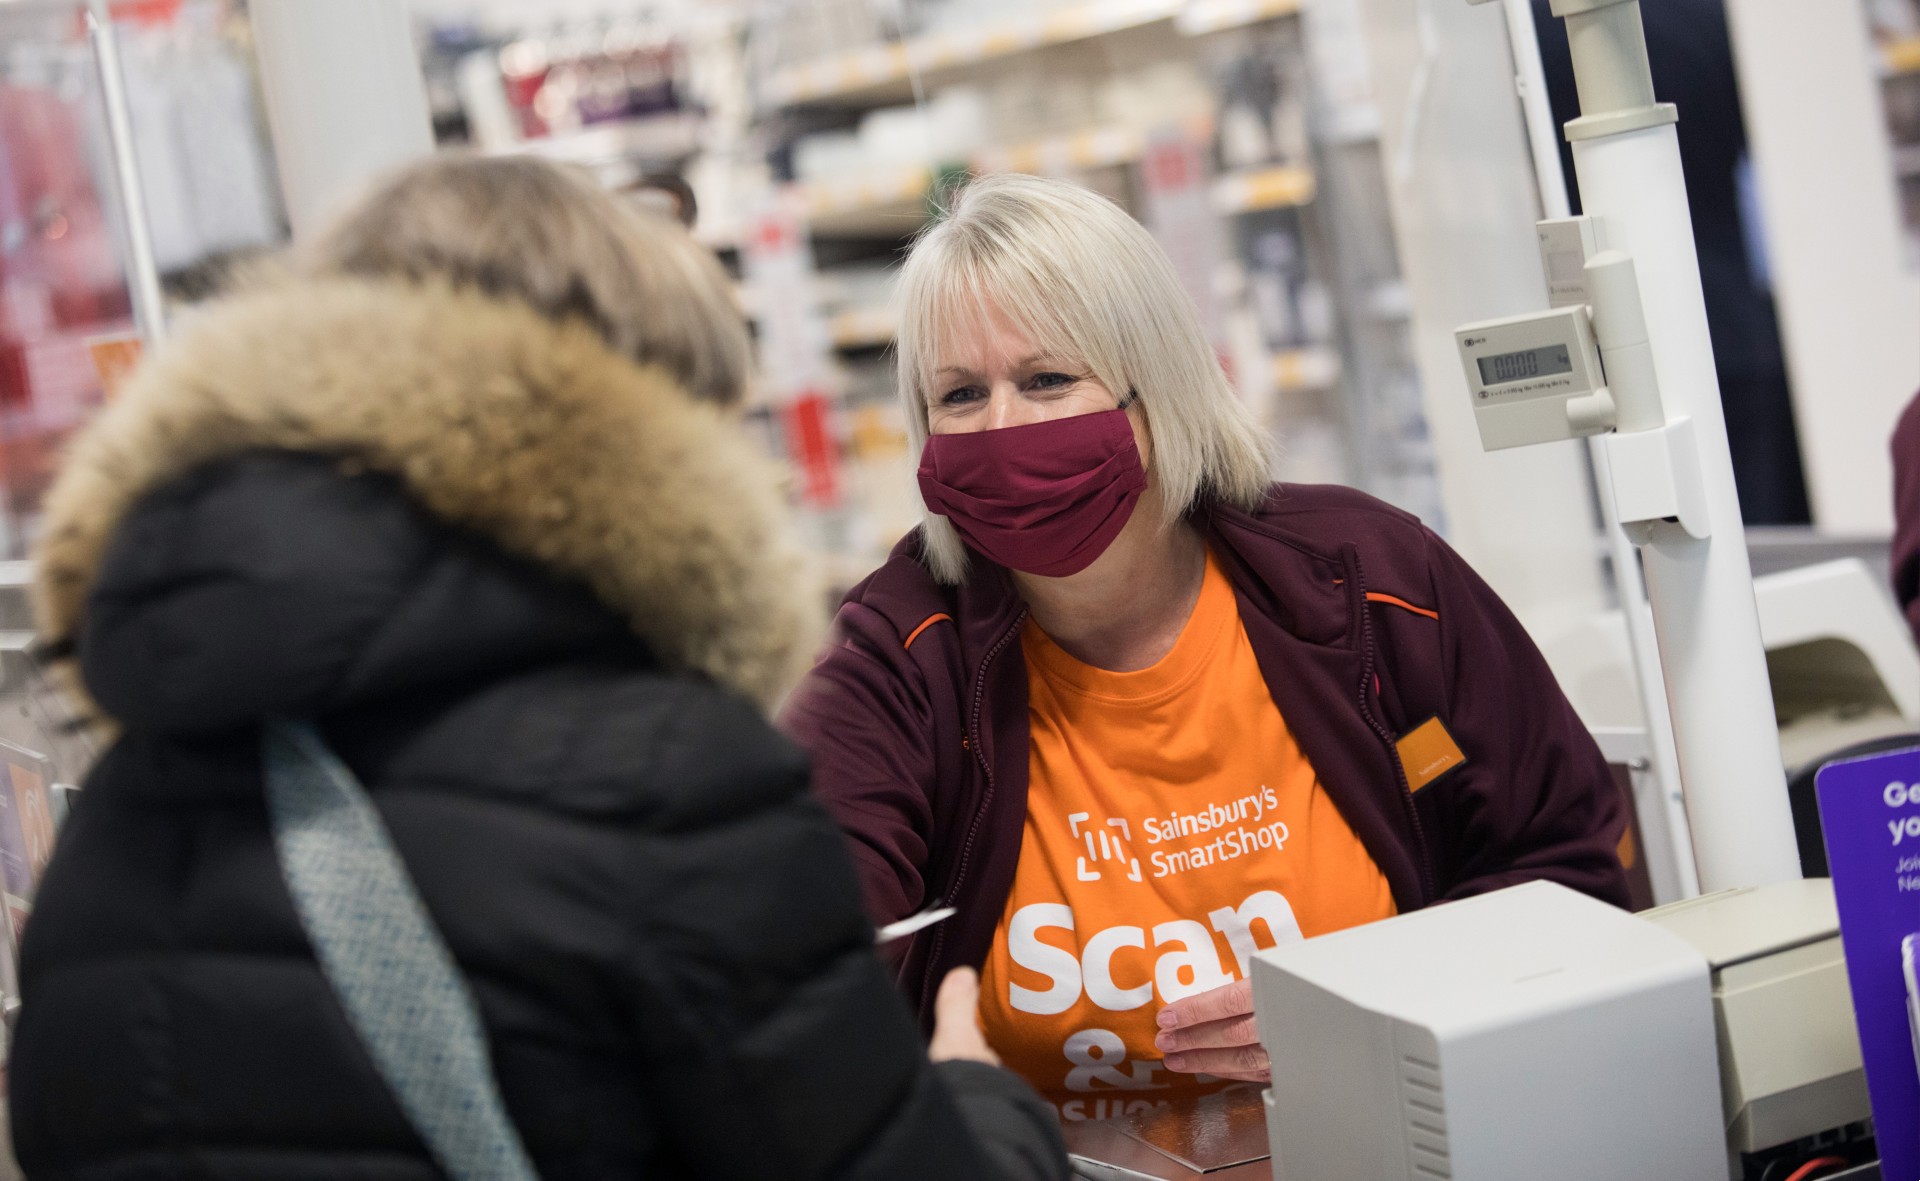 NEWS | Sainsbury’s staff to receive pay rise with all colleagues set to be paid at least £10 an hour – MORE DETAILS